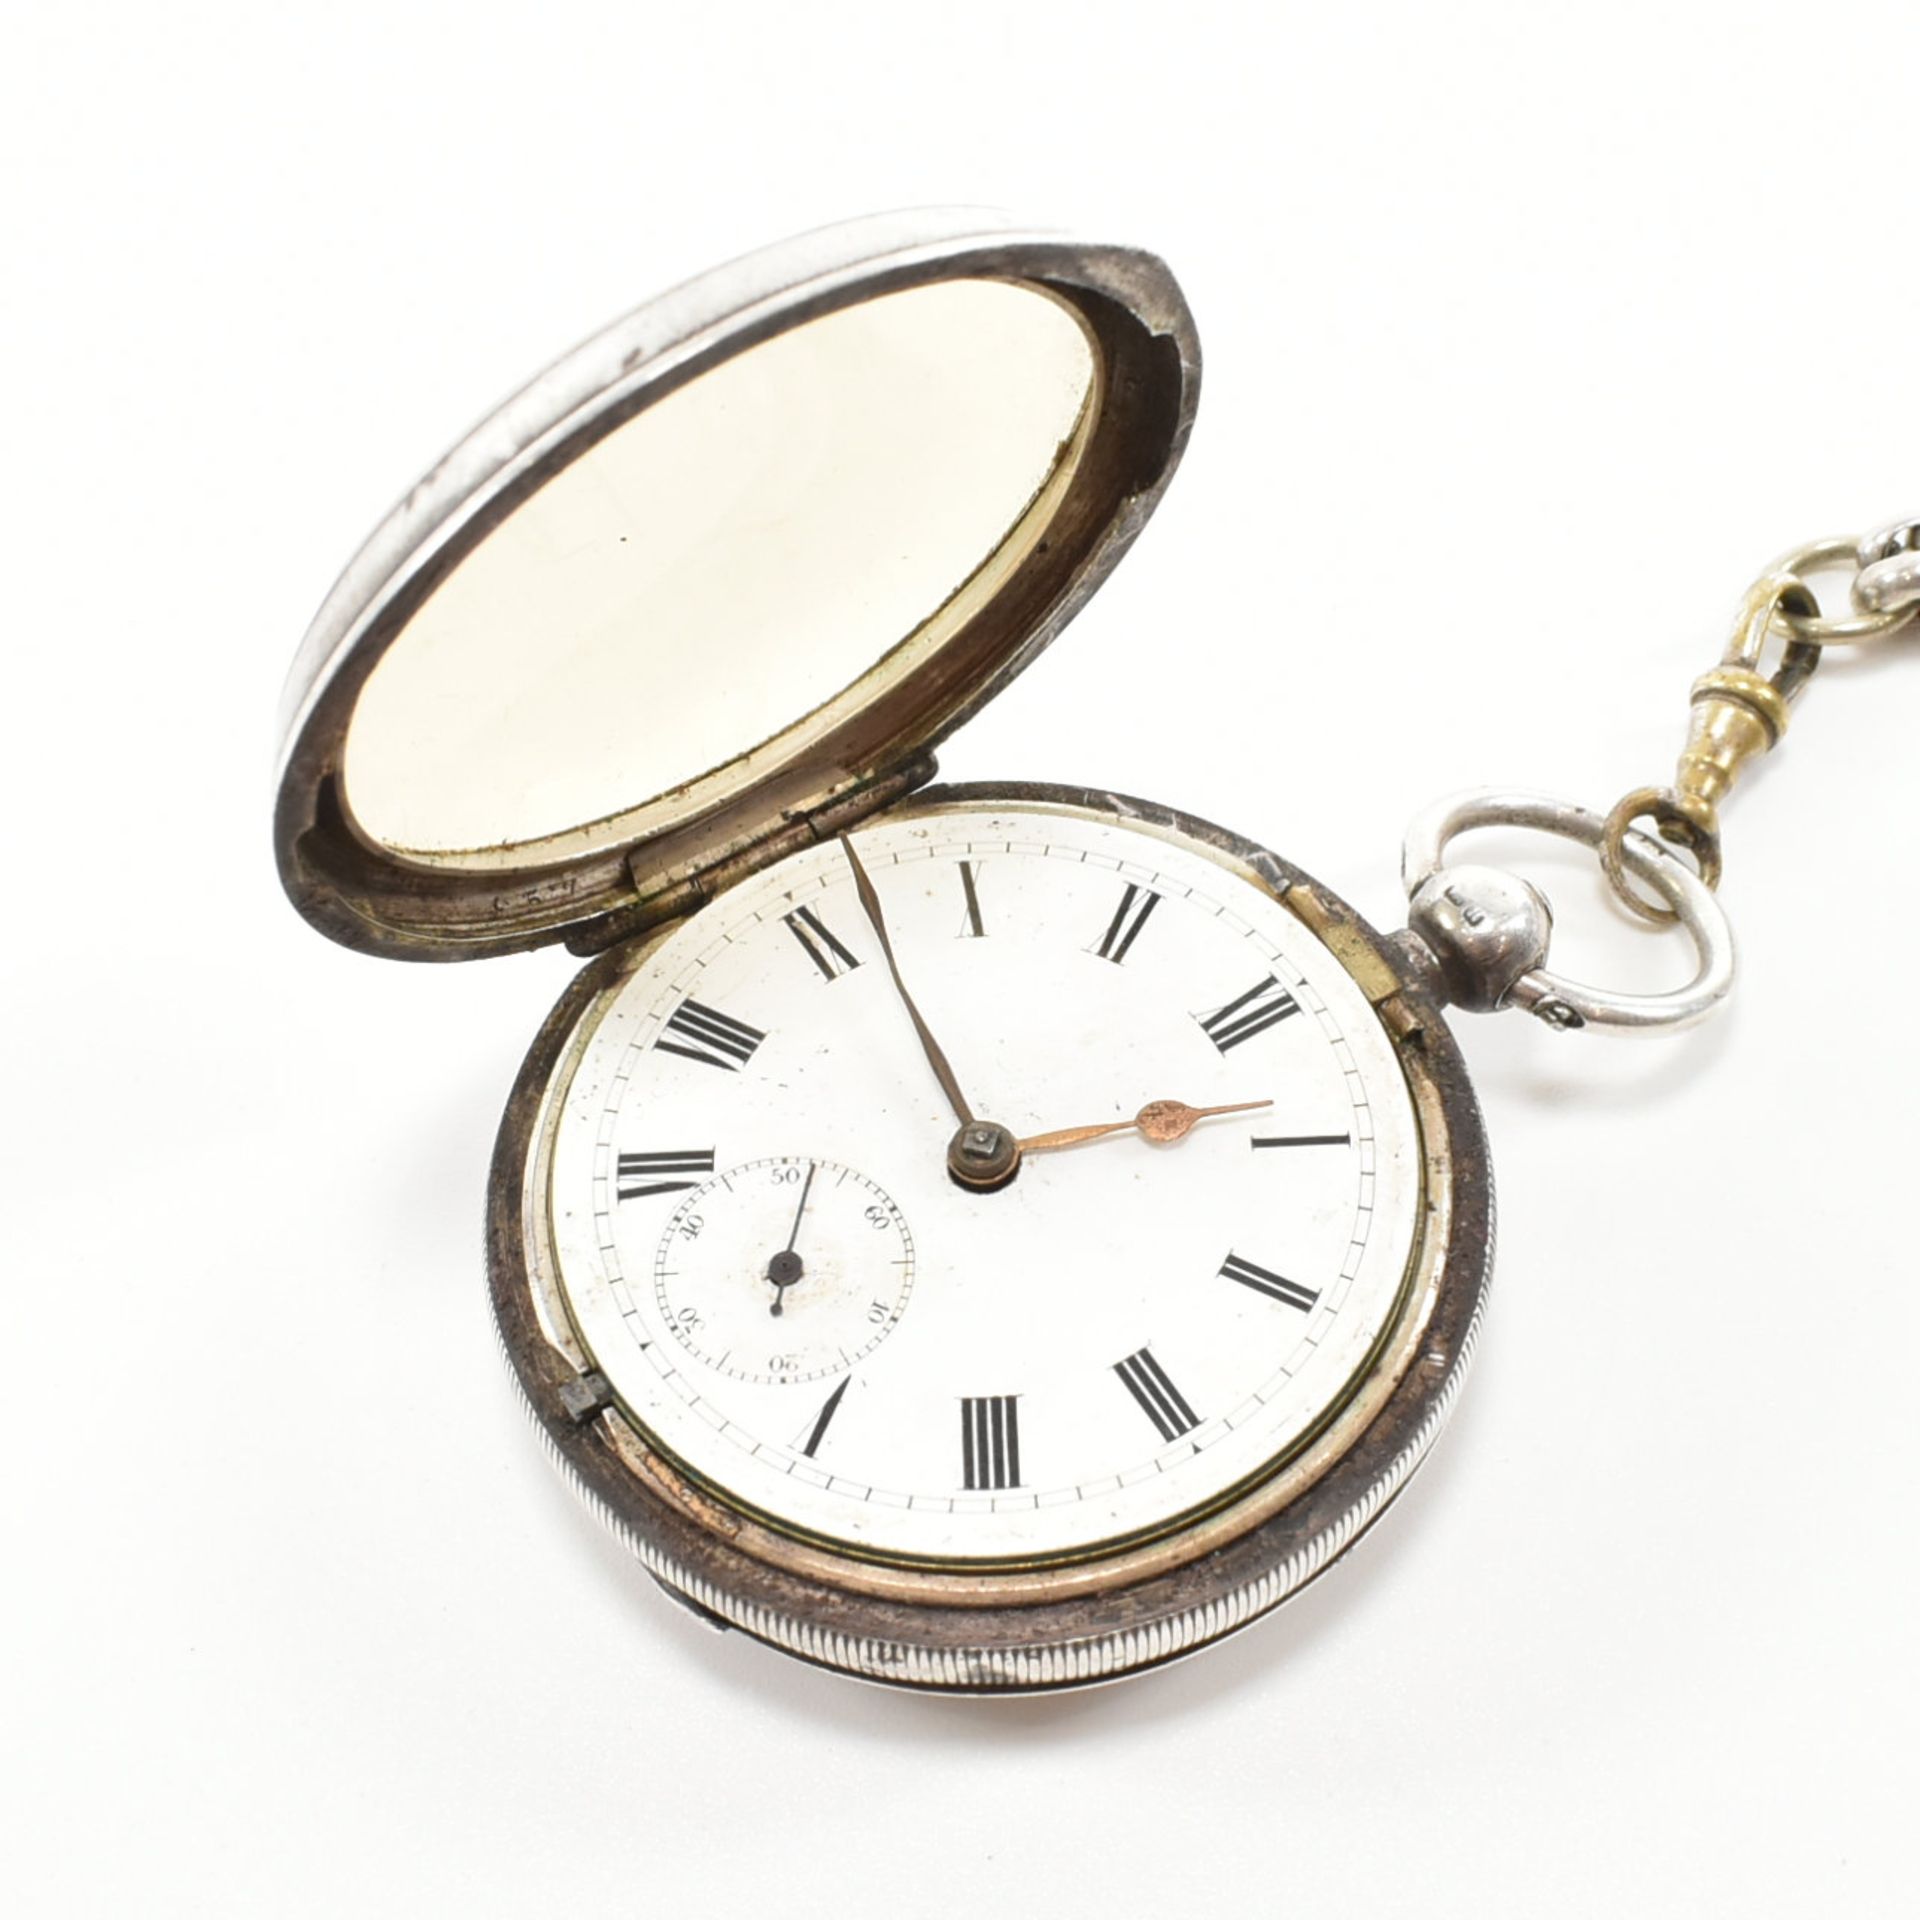 EARLY 20TH CENTURY 1901 HALLMARKED SILVER CASE POCKET WATCH - Image 7 of 14